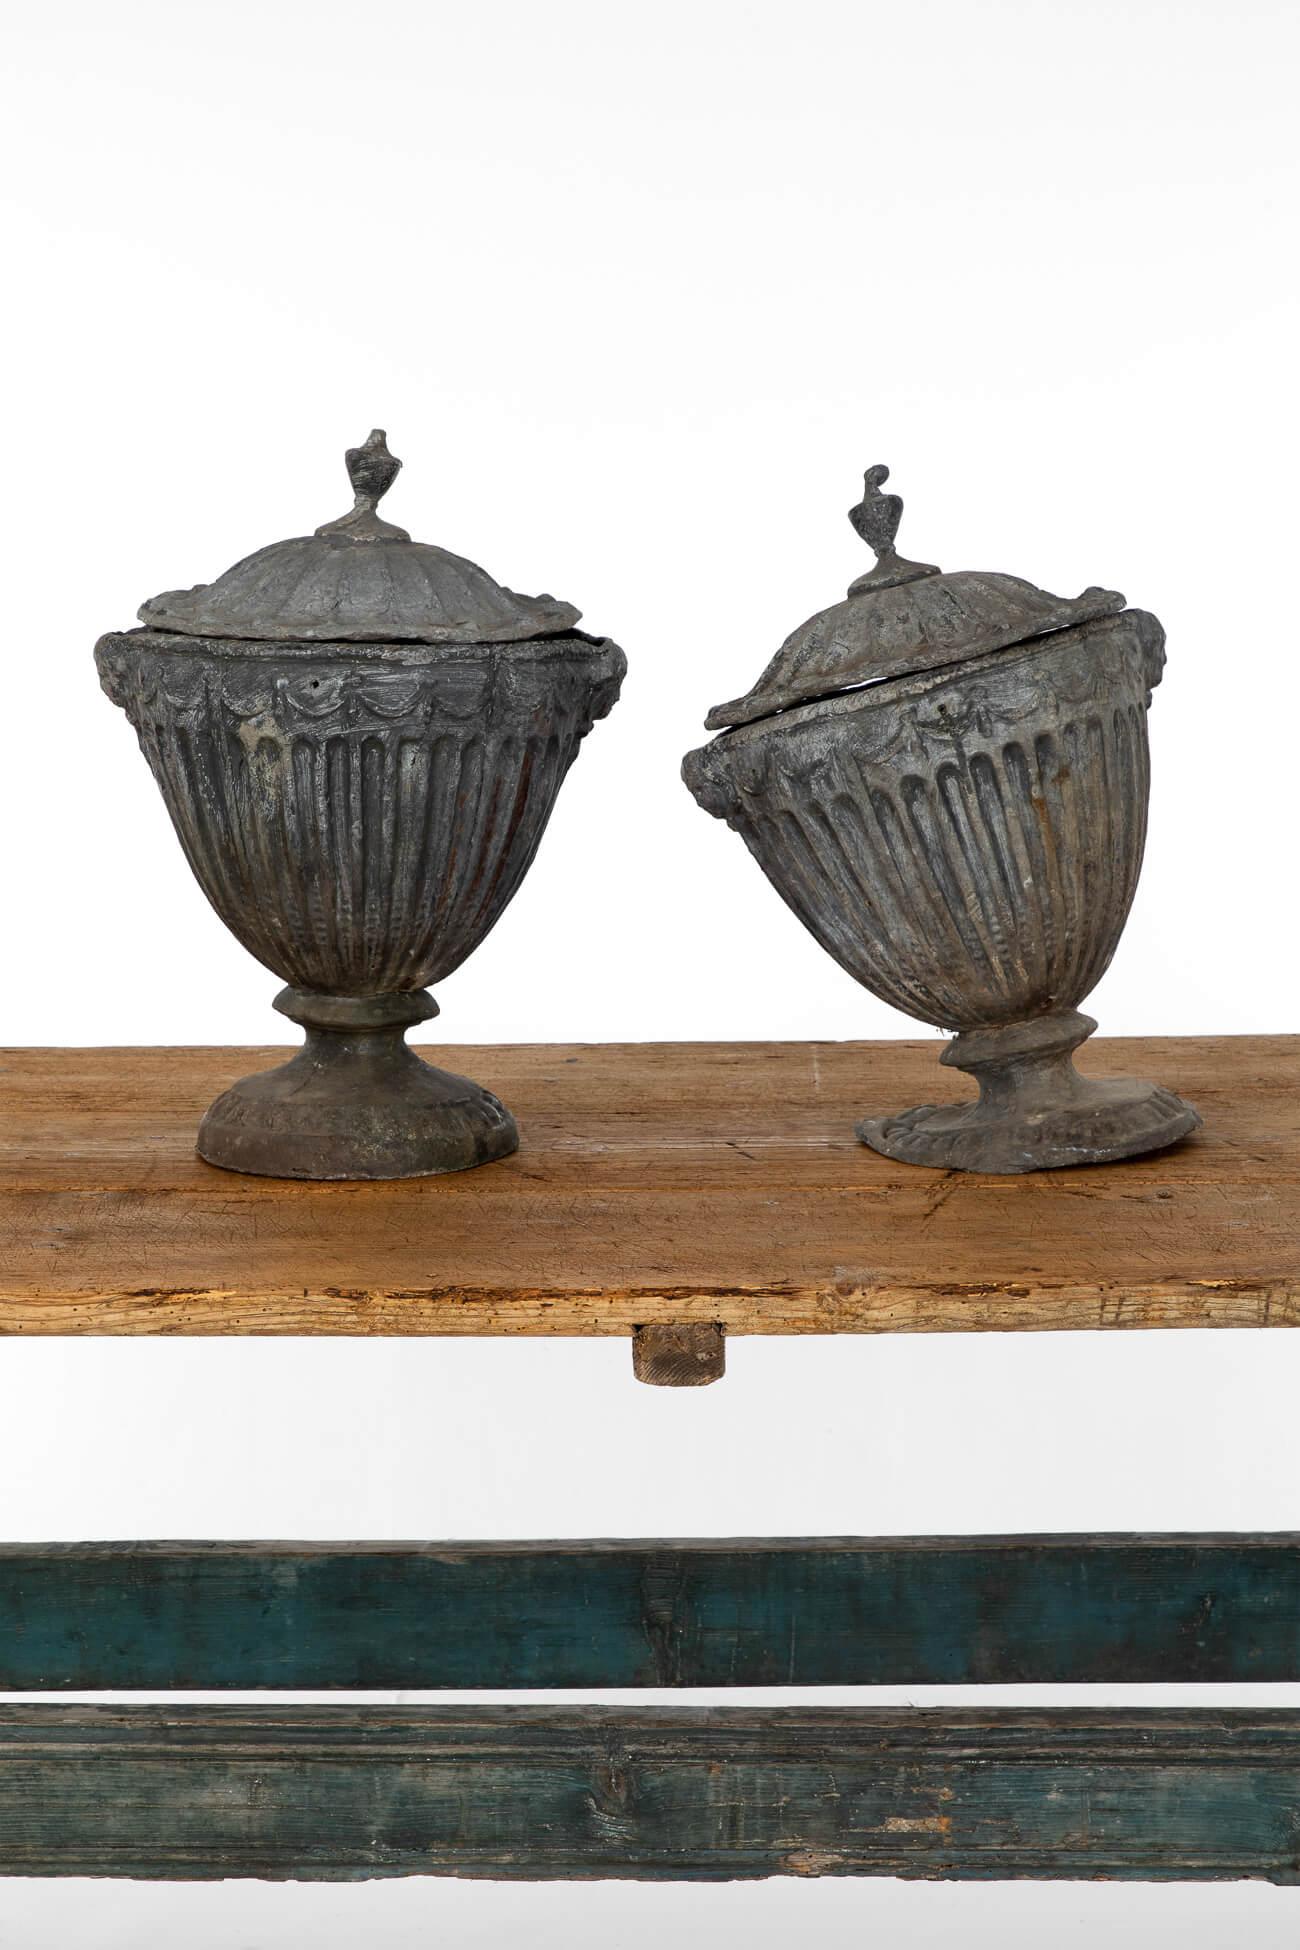 A fabulous pair of lead urns based on the design of the British Georgian architect Robert Adam.

Neoclassical in design with fluted decoration to the sides and base.

The urns are heavily weighted as fitting the original designs from circa